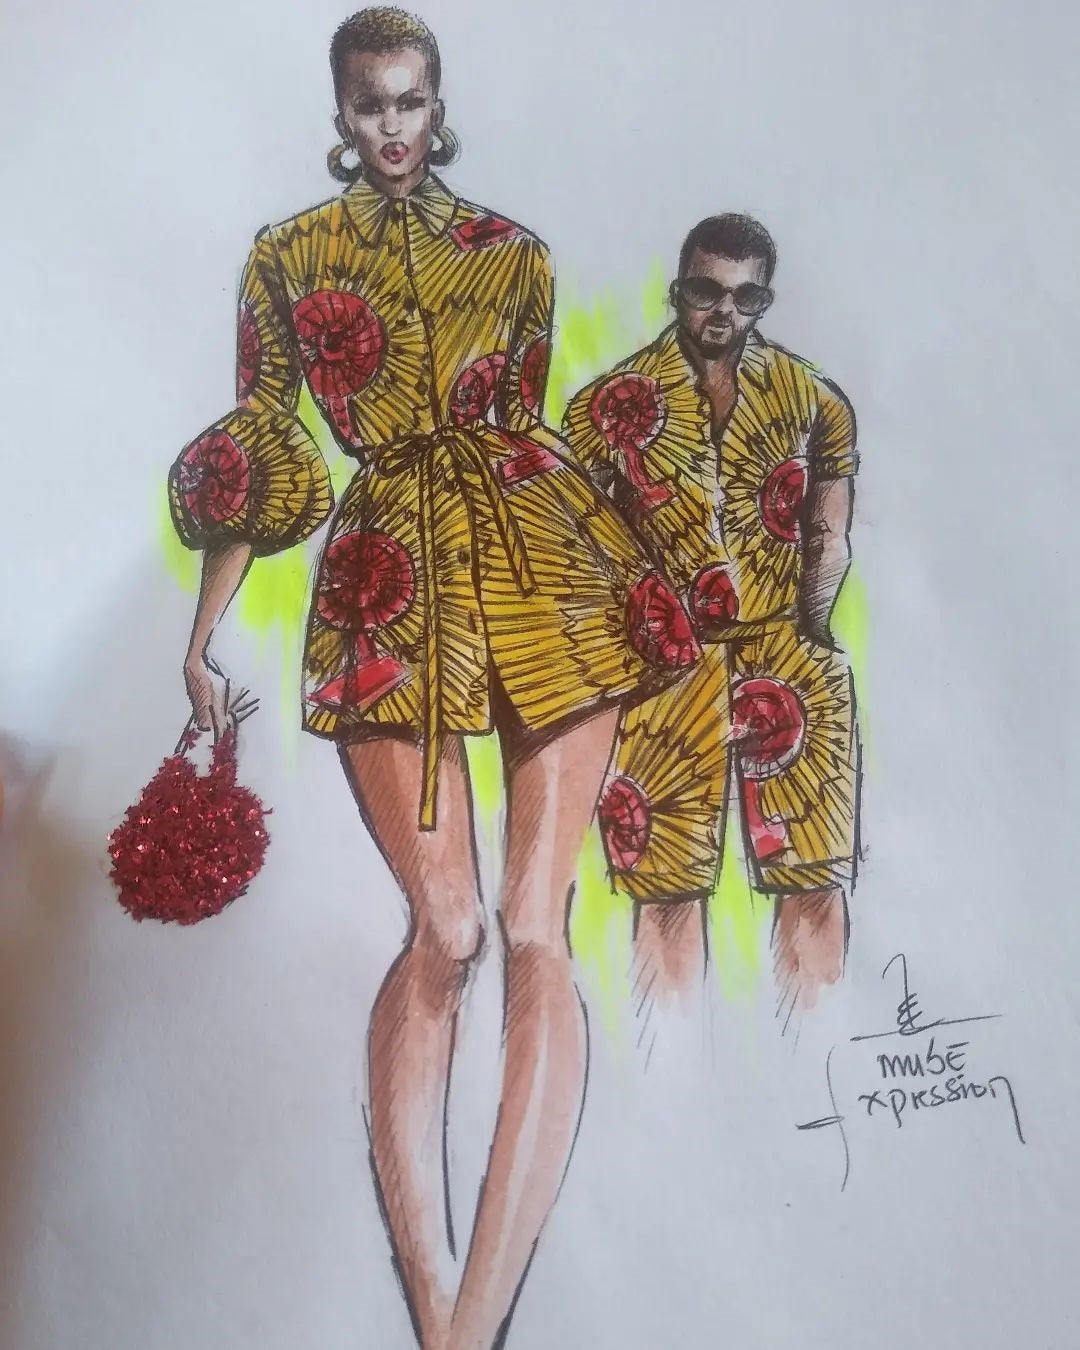 12. Outfit drawing of two people wearing yellow, floral printed outfits.